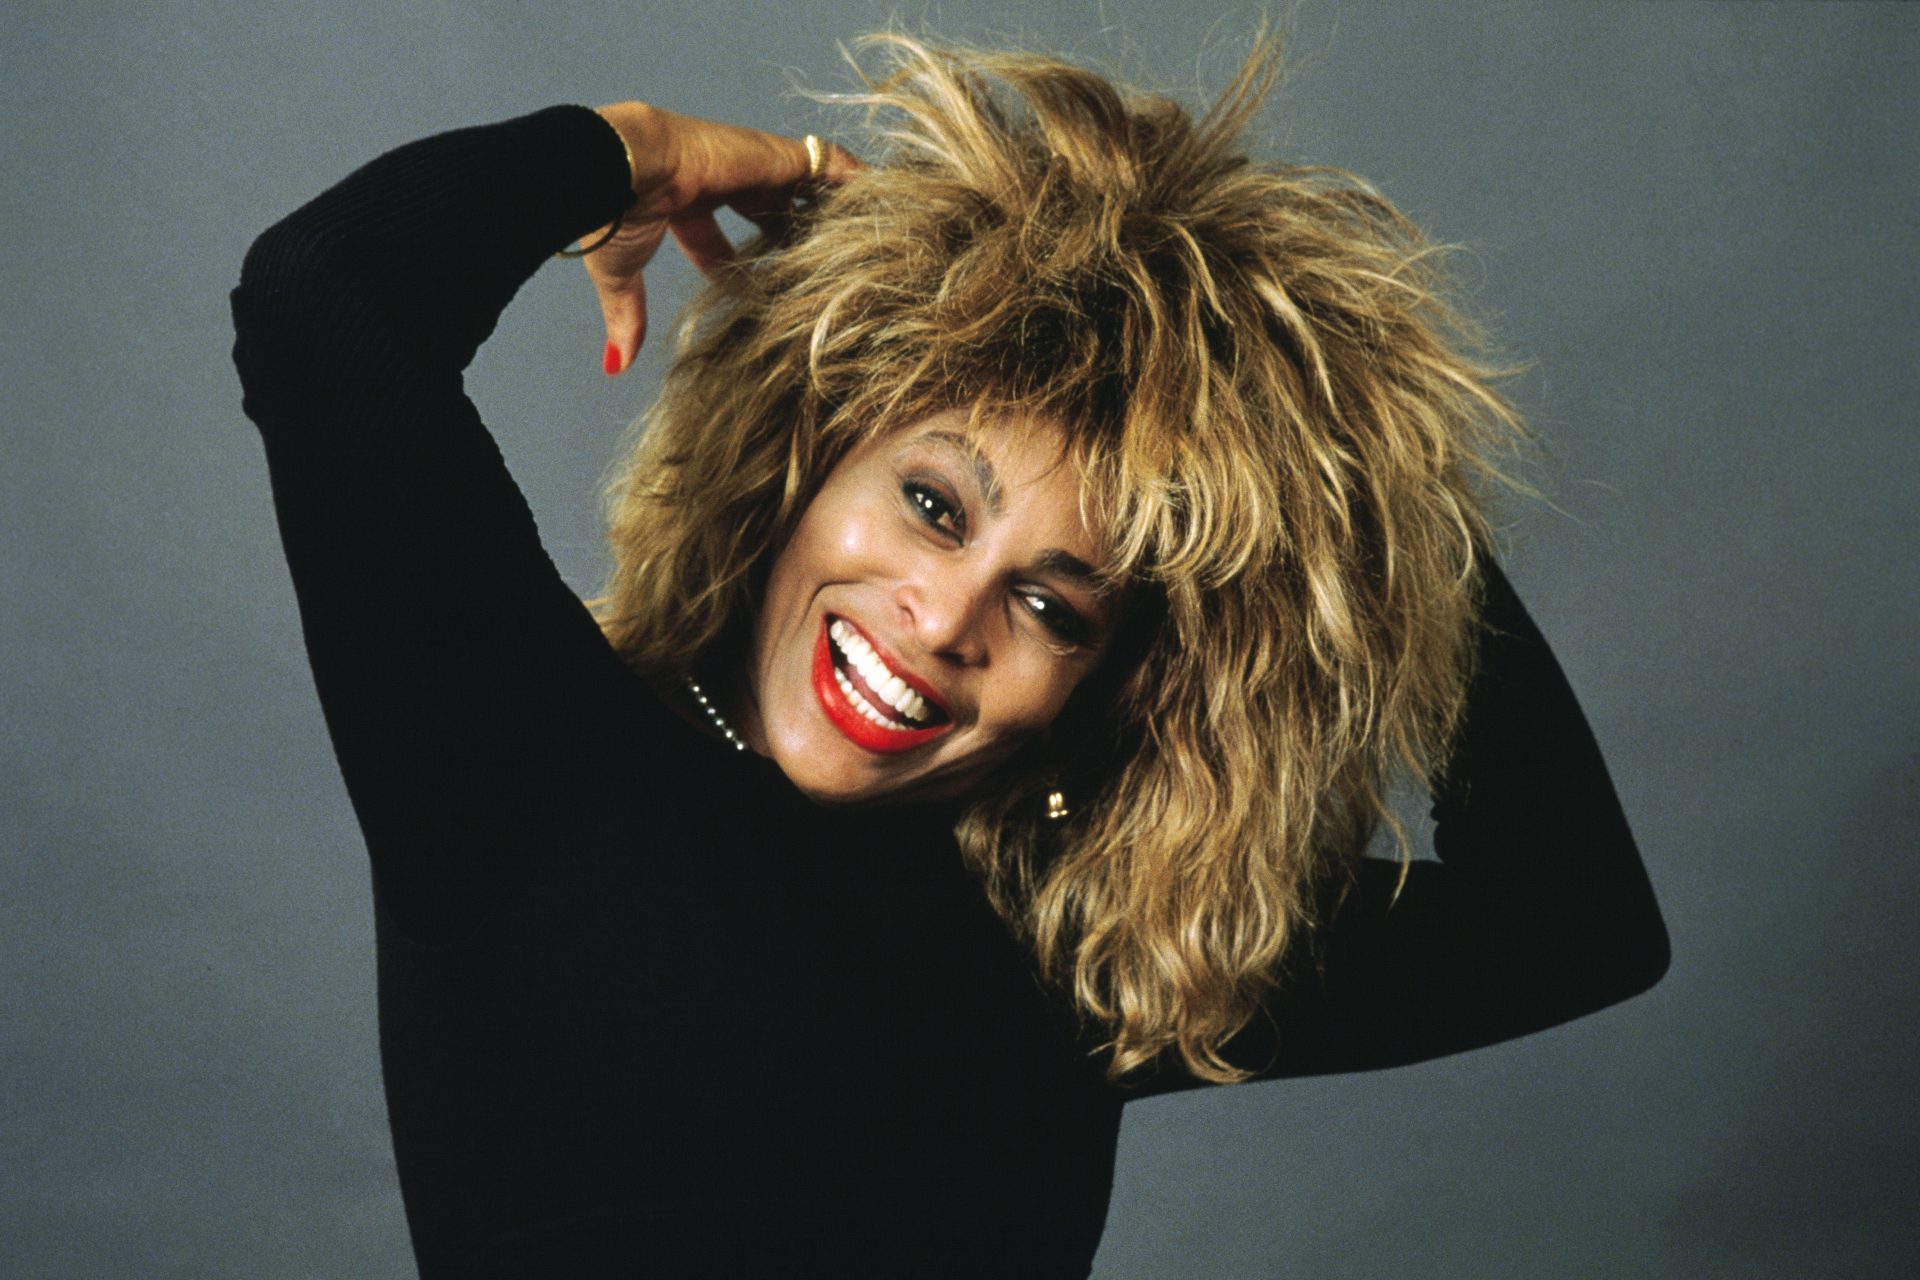 'Private Dancer' by Tina Turner